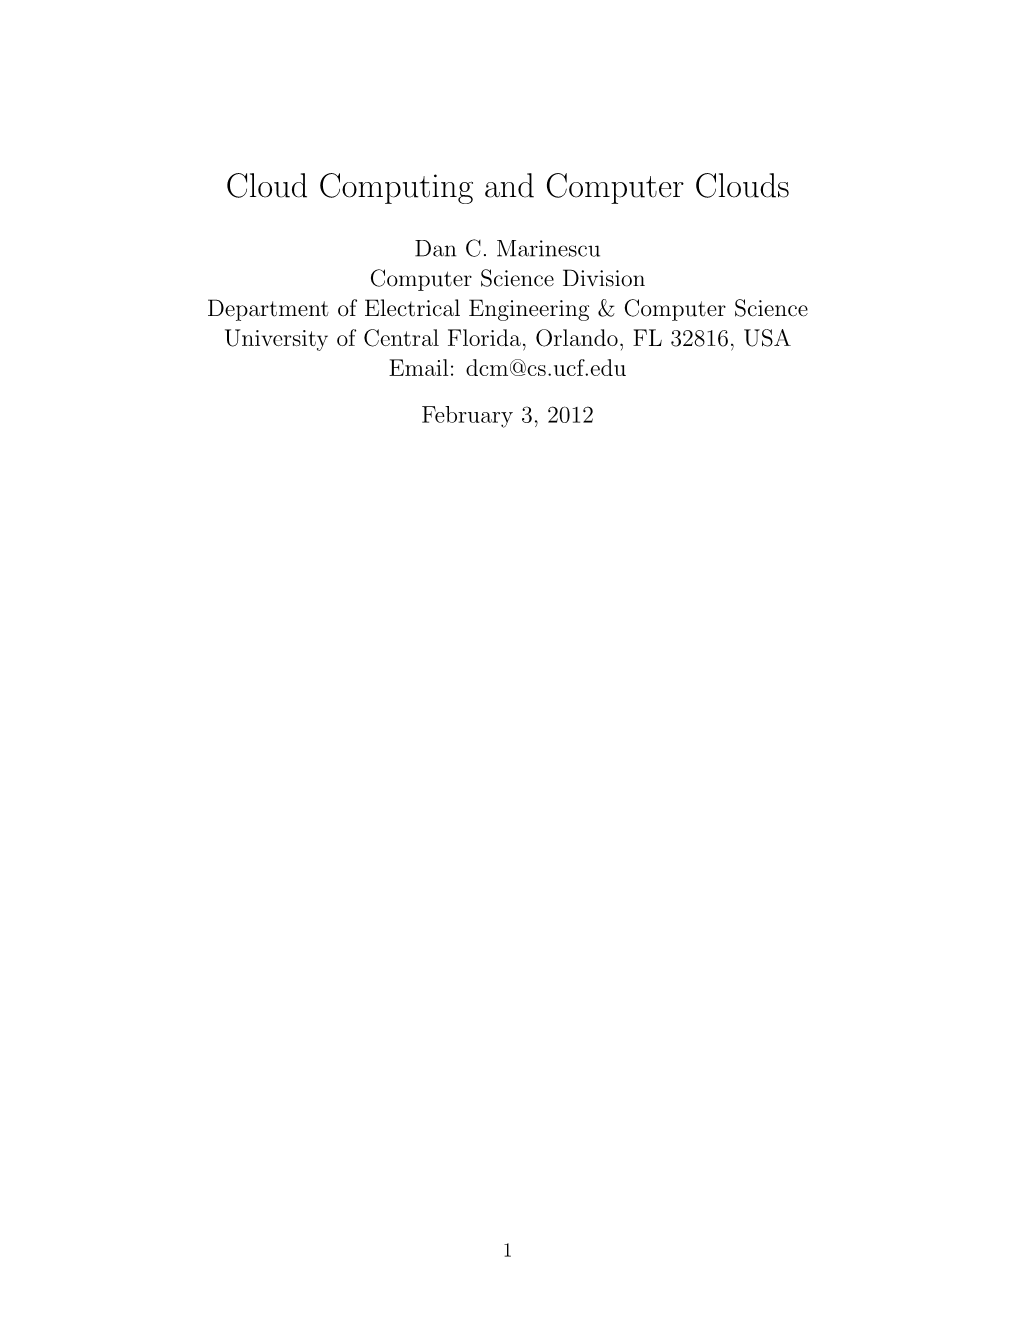 Cloud Computing and Computer Clouds